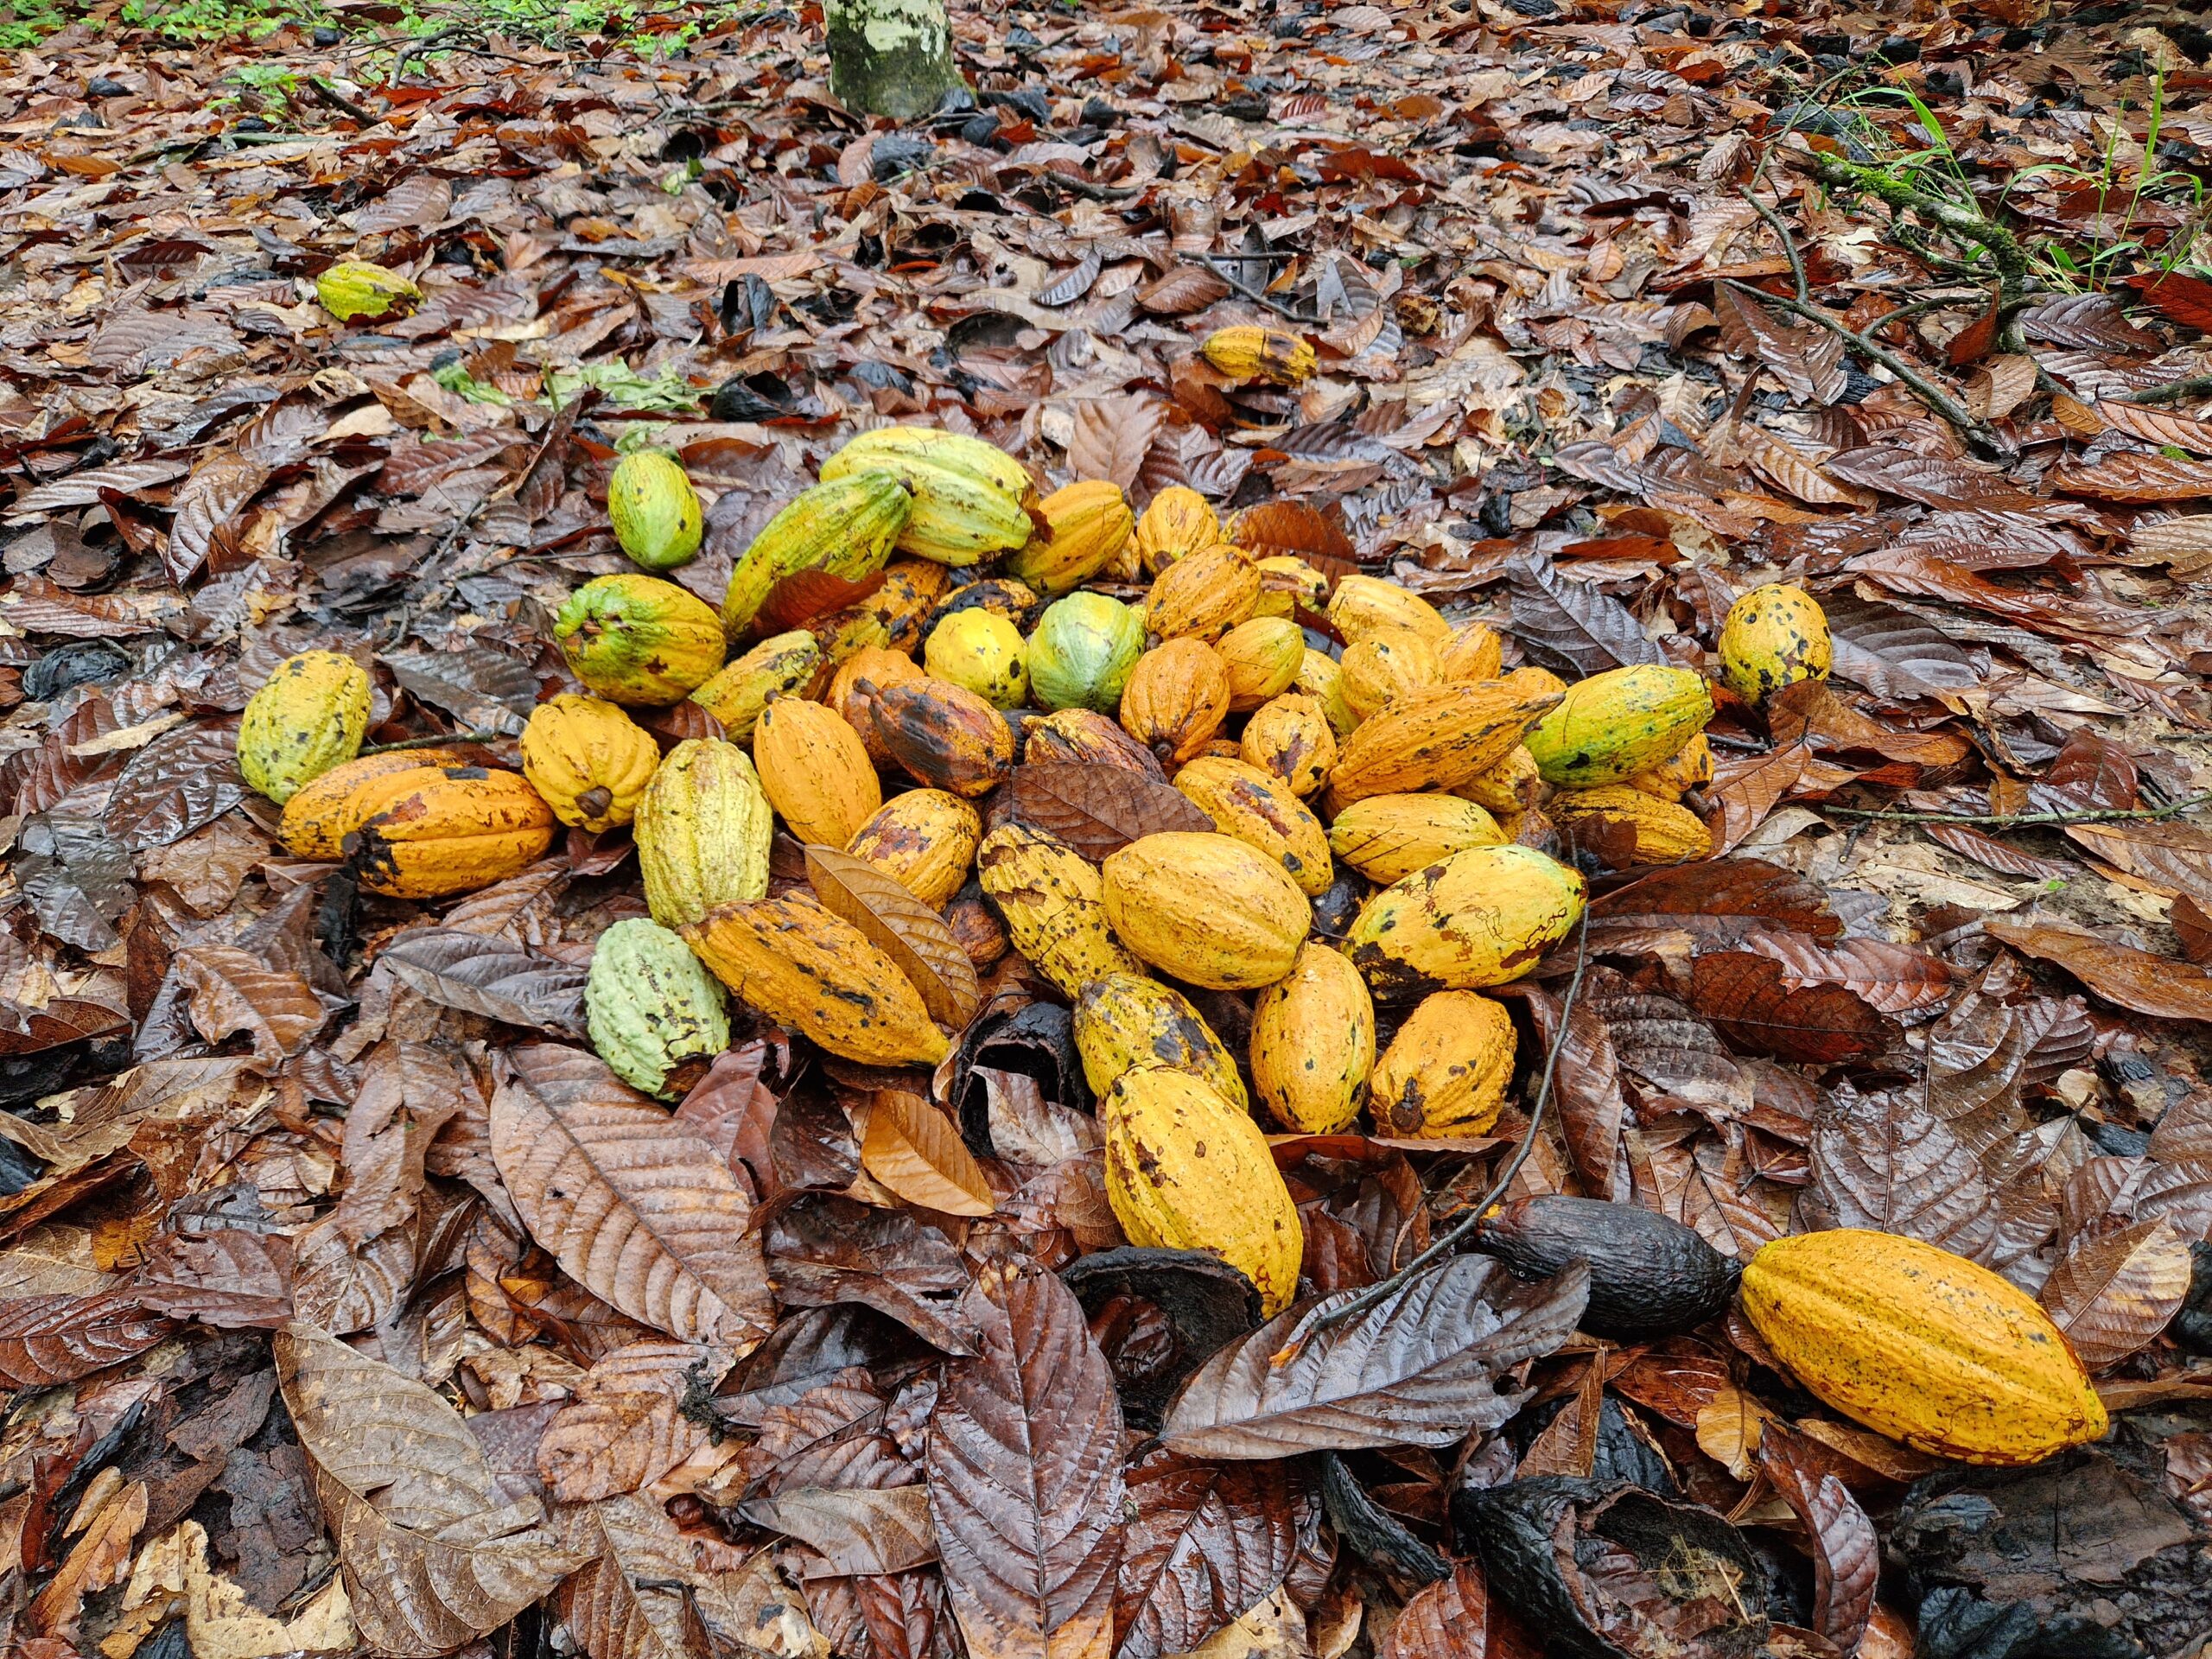 Living Income and Child Labour in the Cocoa Sector of Côte d’Ivoire